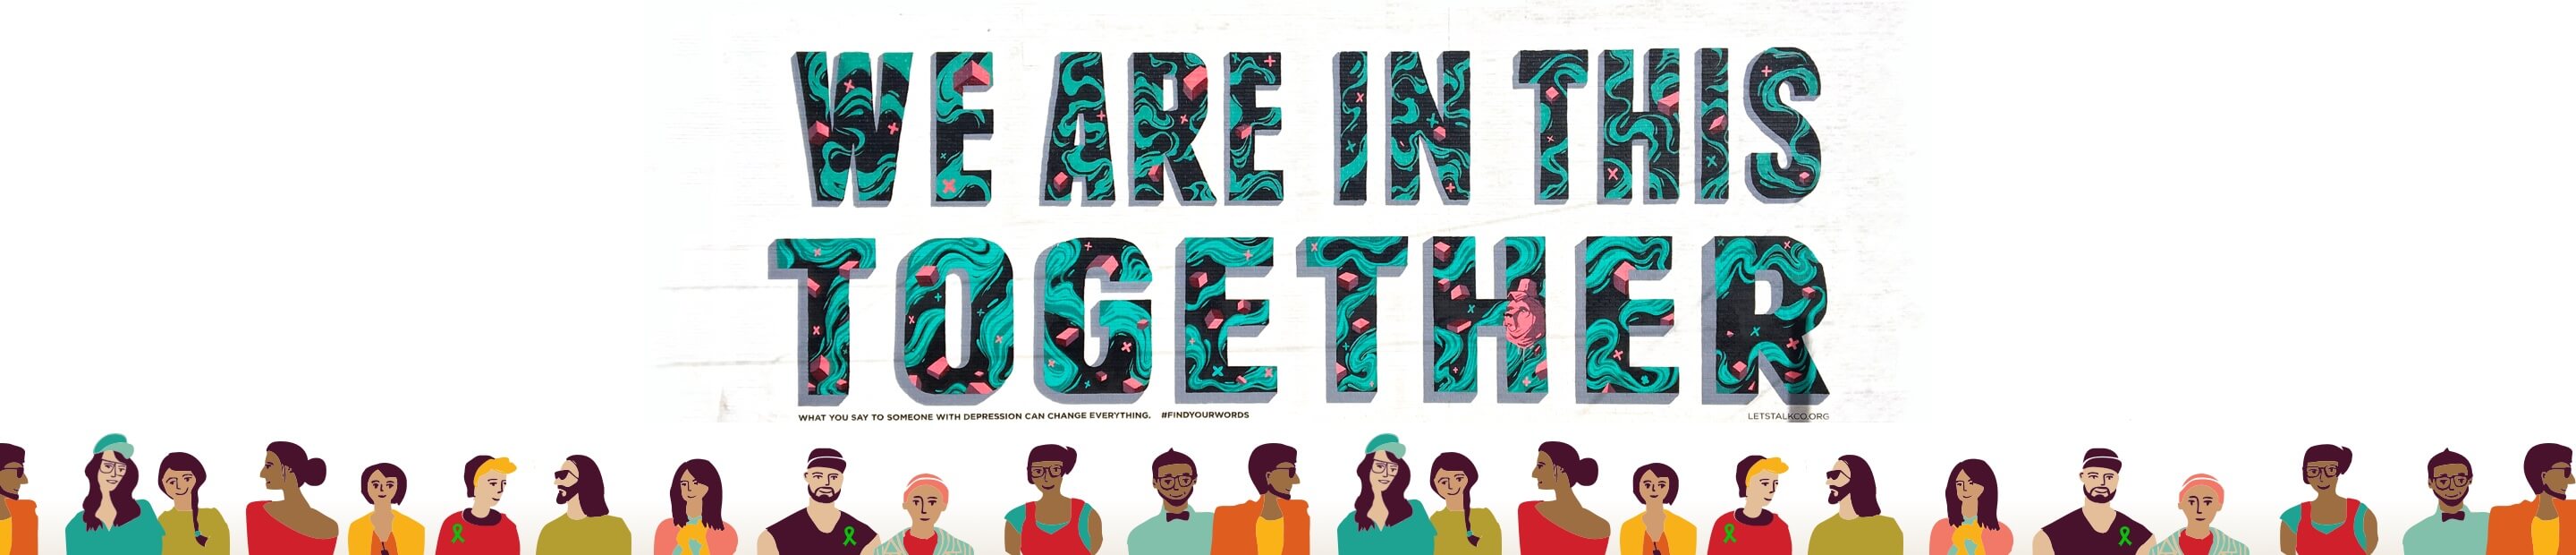 Illustration of a diverse group of young people standing in front of a wall with a mural of large colorful letters which reads: 'We Are in This Together'. The subtitle reads: 'What to say to someone with depression can change everything. #find your words. lets talk co.org'